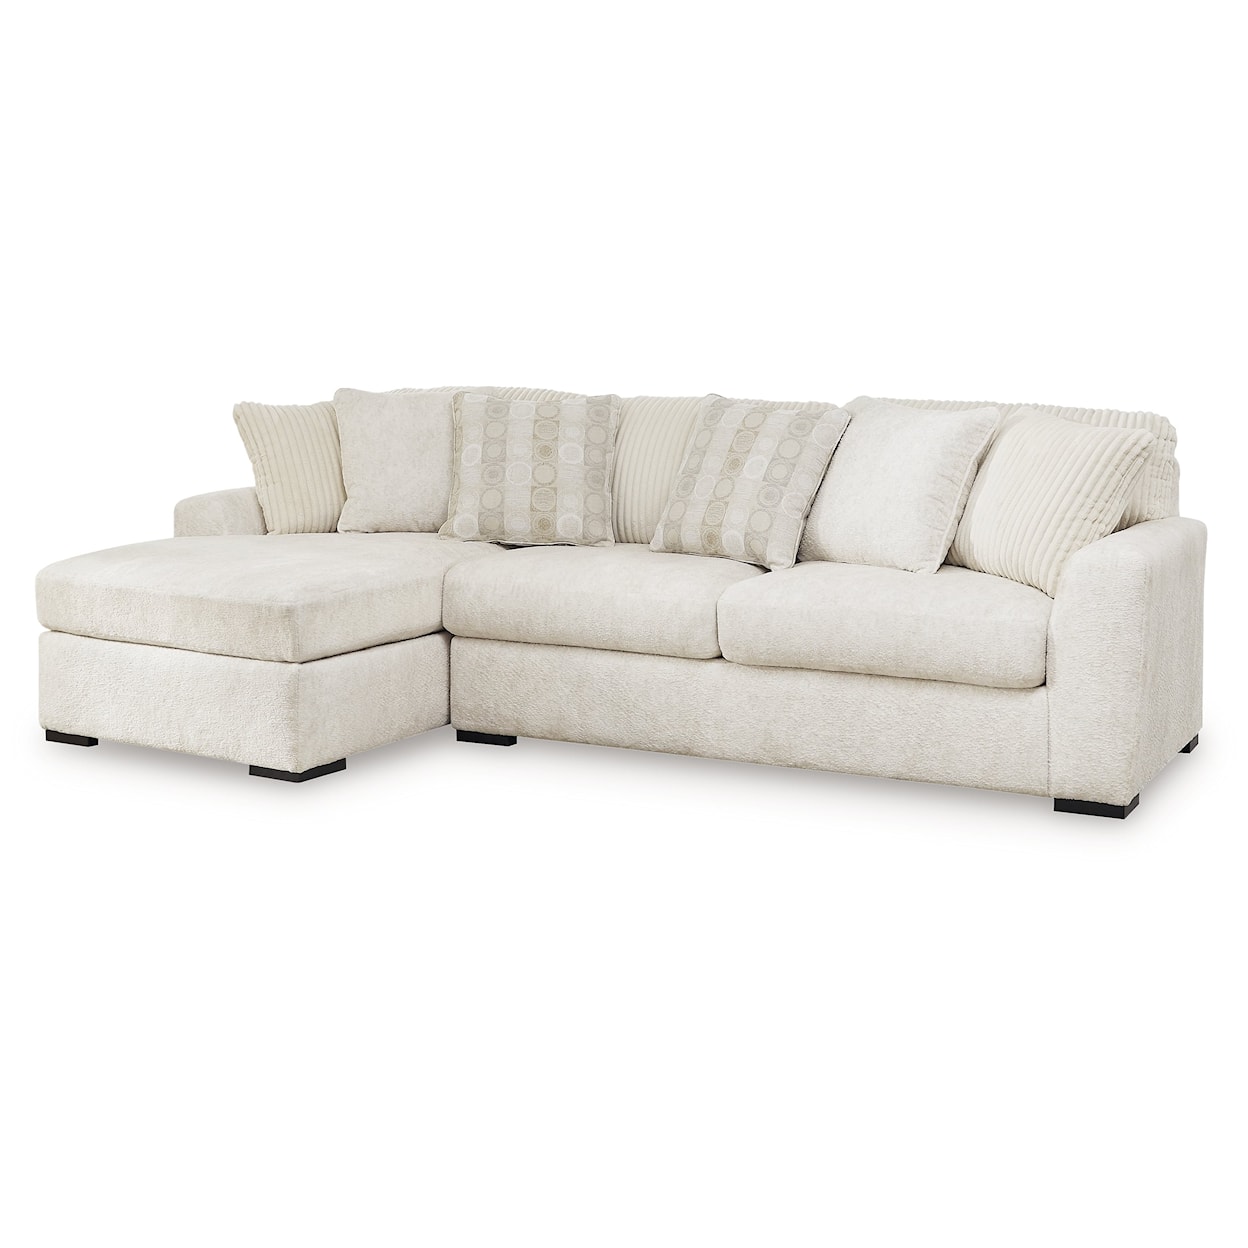 Michael Alan Select Chessington 2-Piece Sectional With Chaise